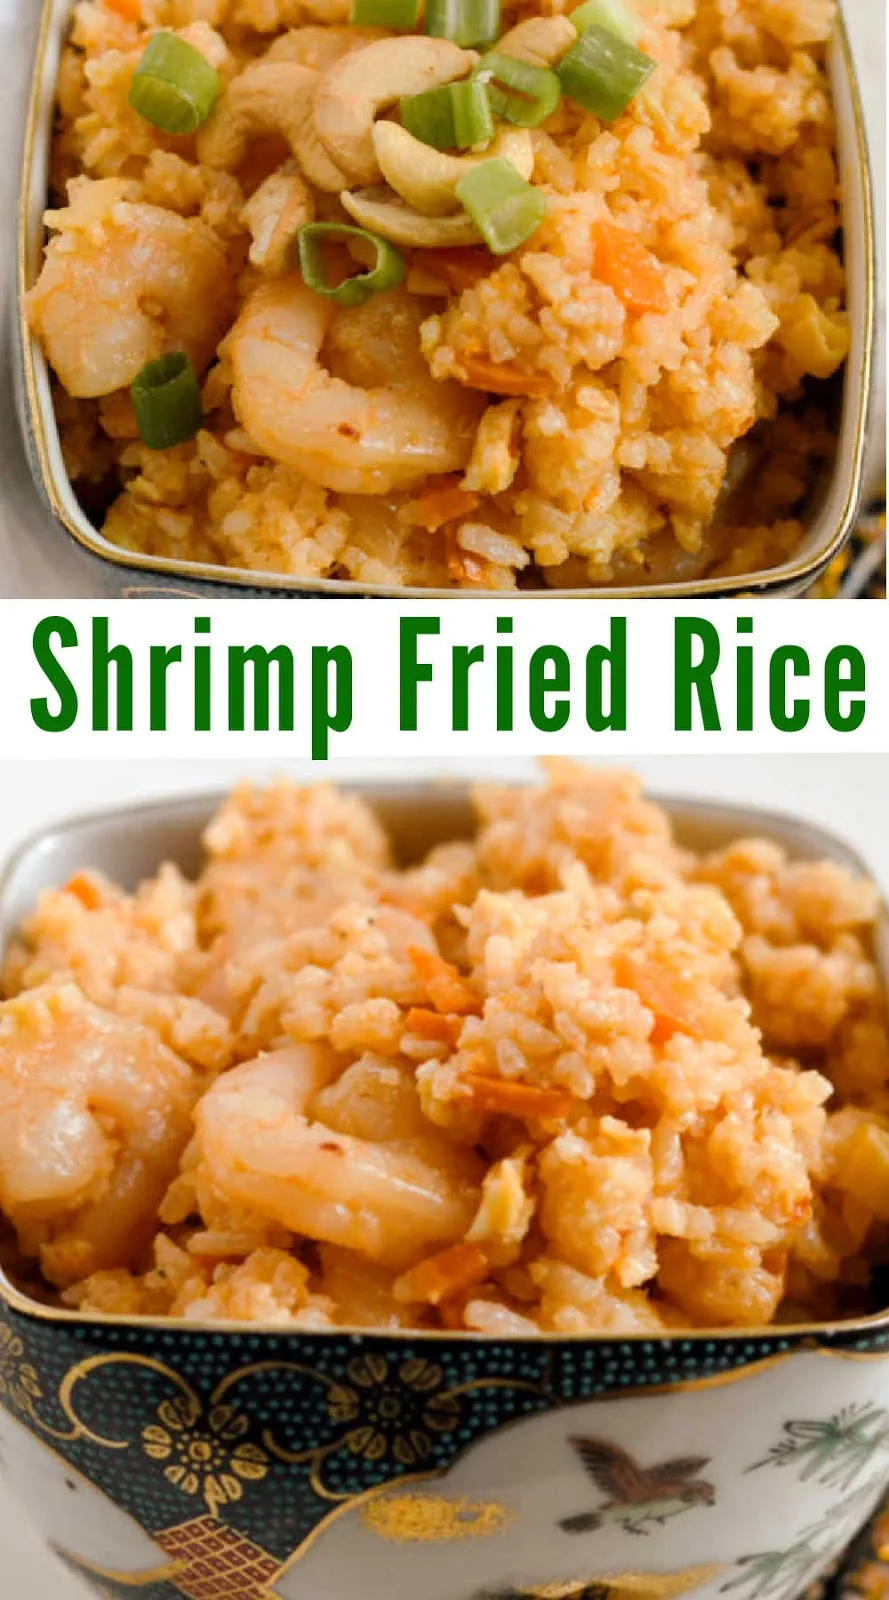 Shrimp fried rice is a great tasty meal that can be ready in about 30 minutes. Plus it is super easy to customize to match your tastes.